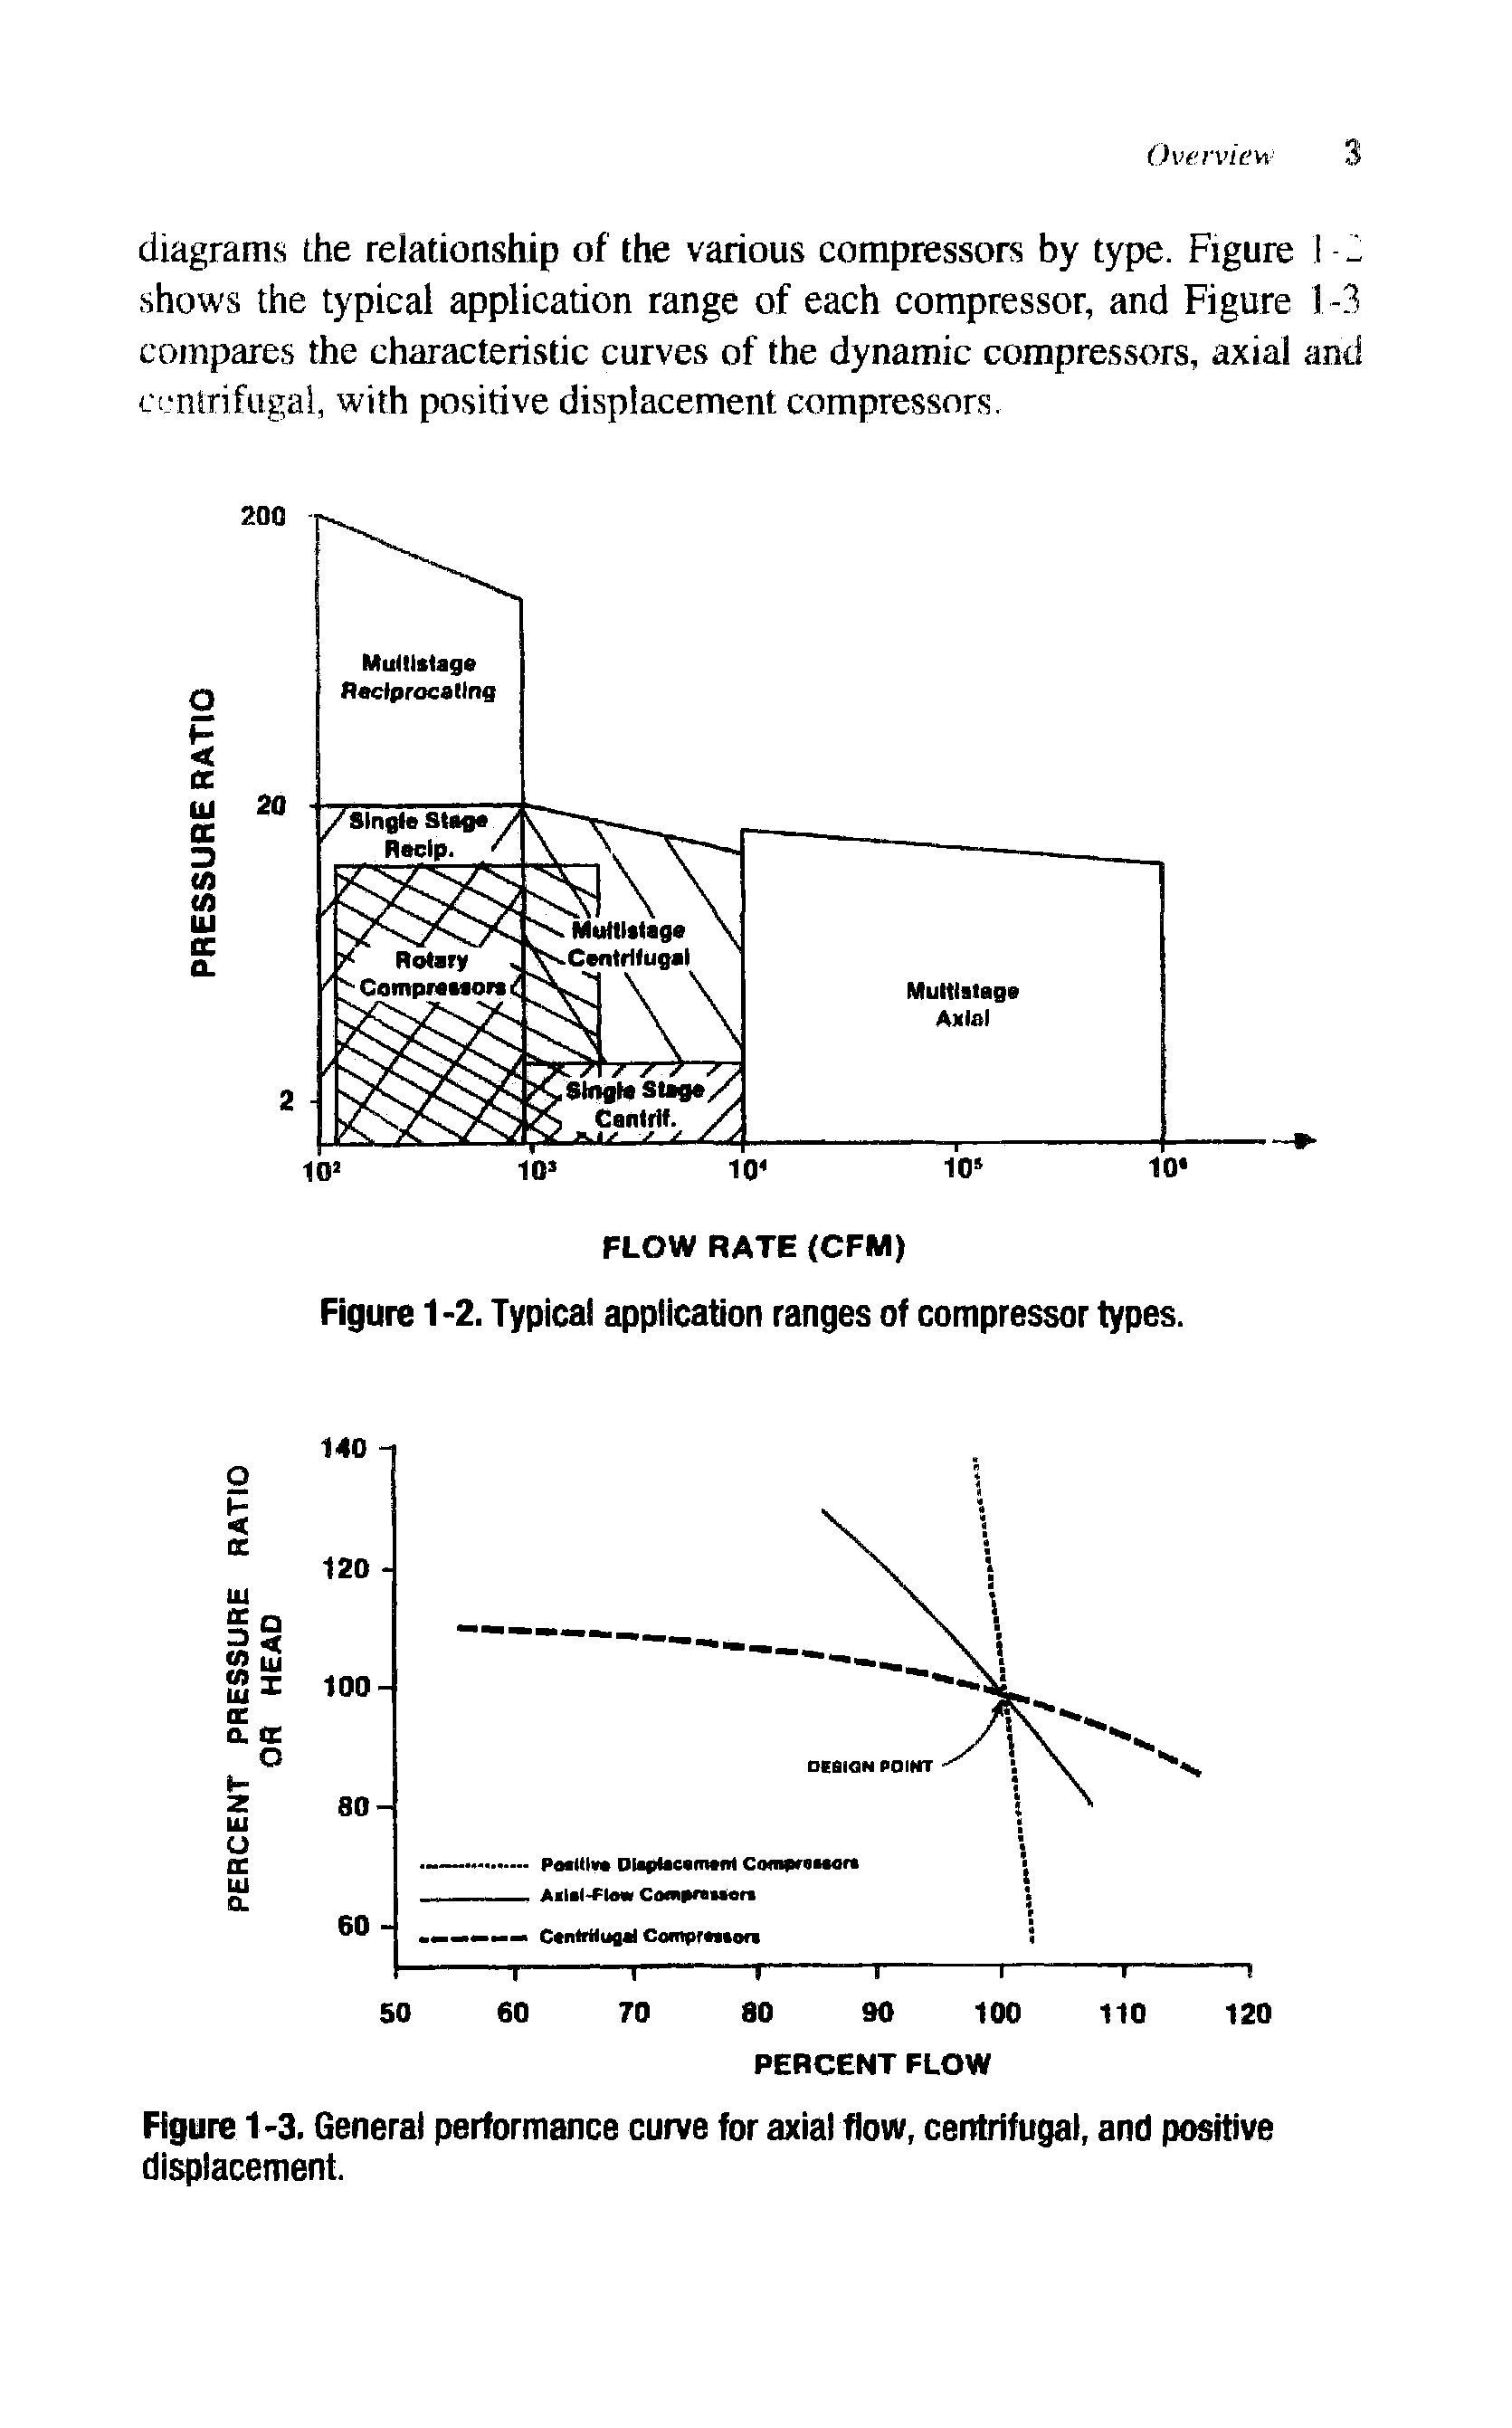 Figure 1-2. Typical application ranges of compressor types.